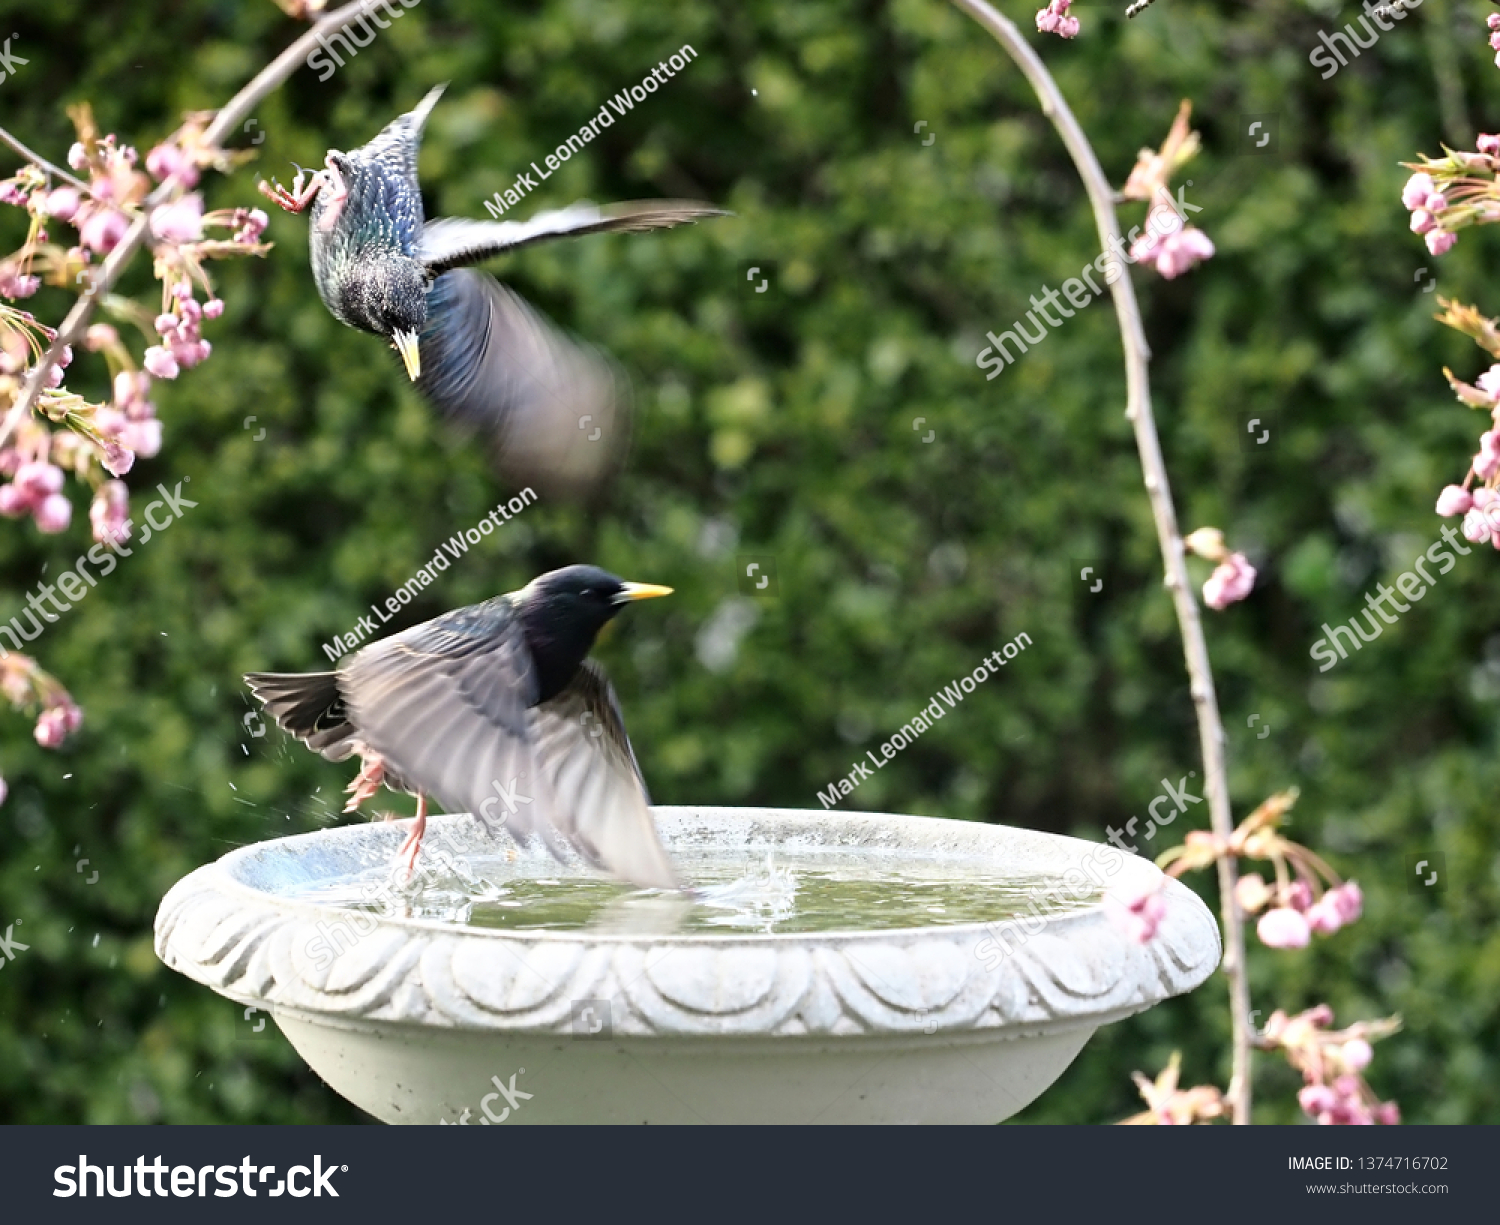 Starlings and Blackbirds in dramatic confrontation over water rights, Cherry Blossoms over stone birdbath. Avian Action. #1374716702